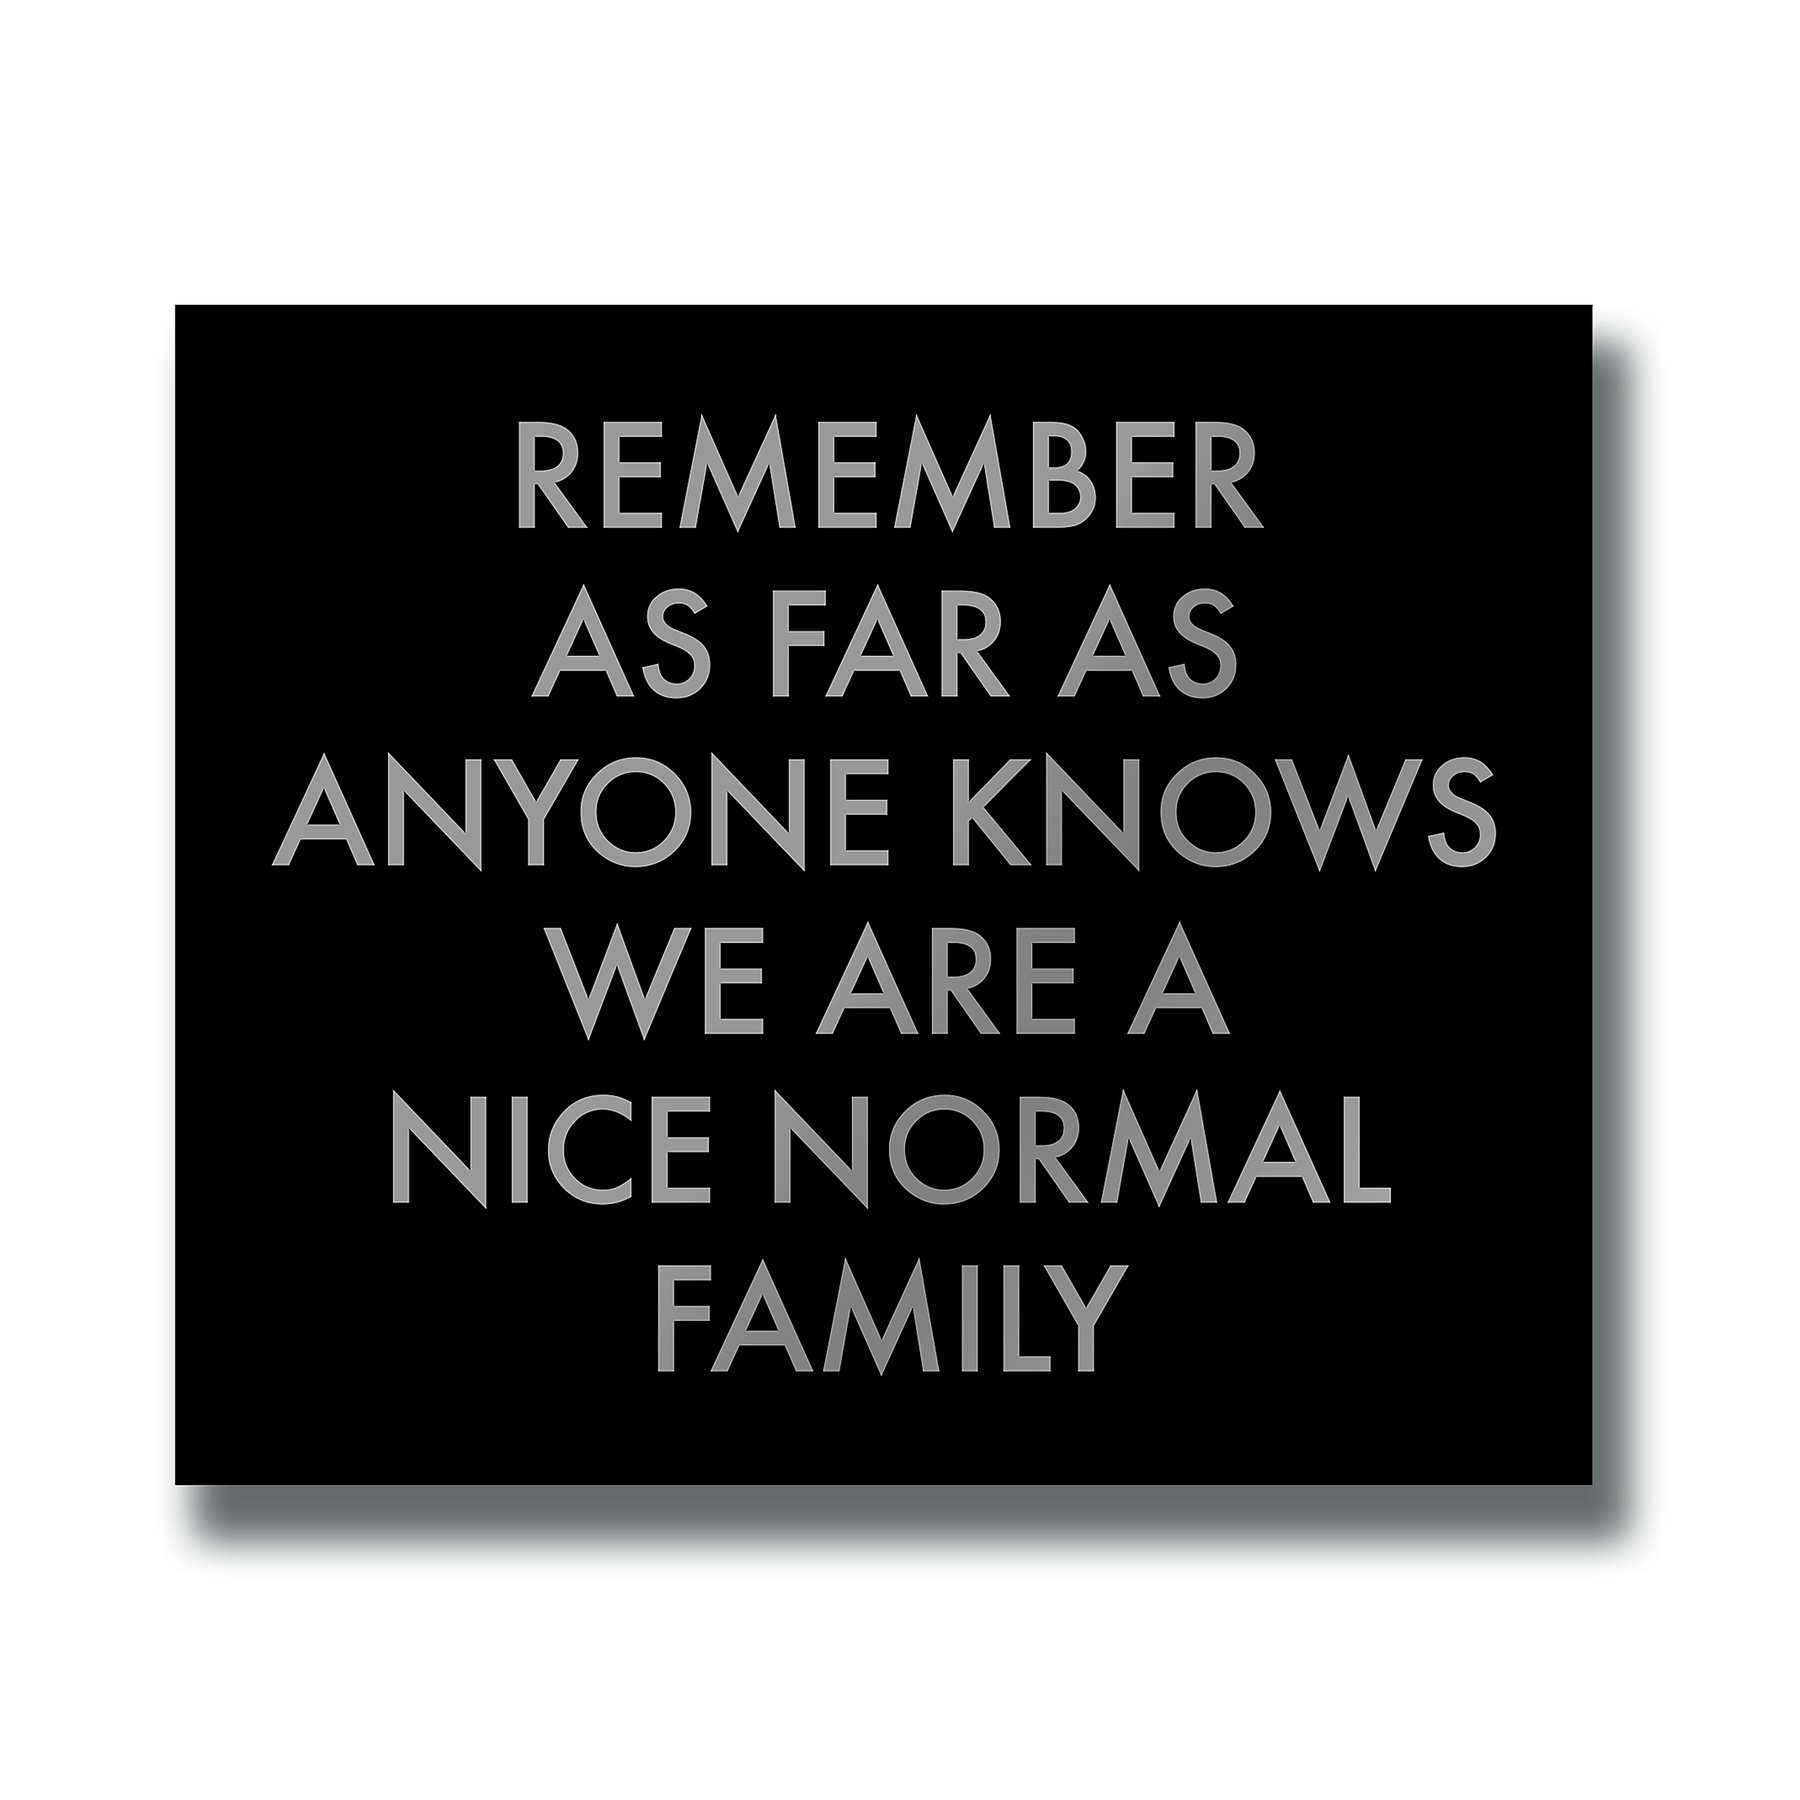 A Nice Normal Family Silver Foil Plaque - Image 1